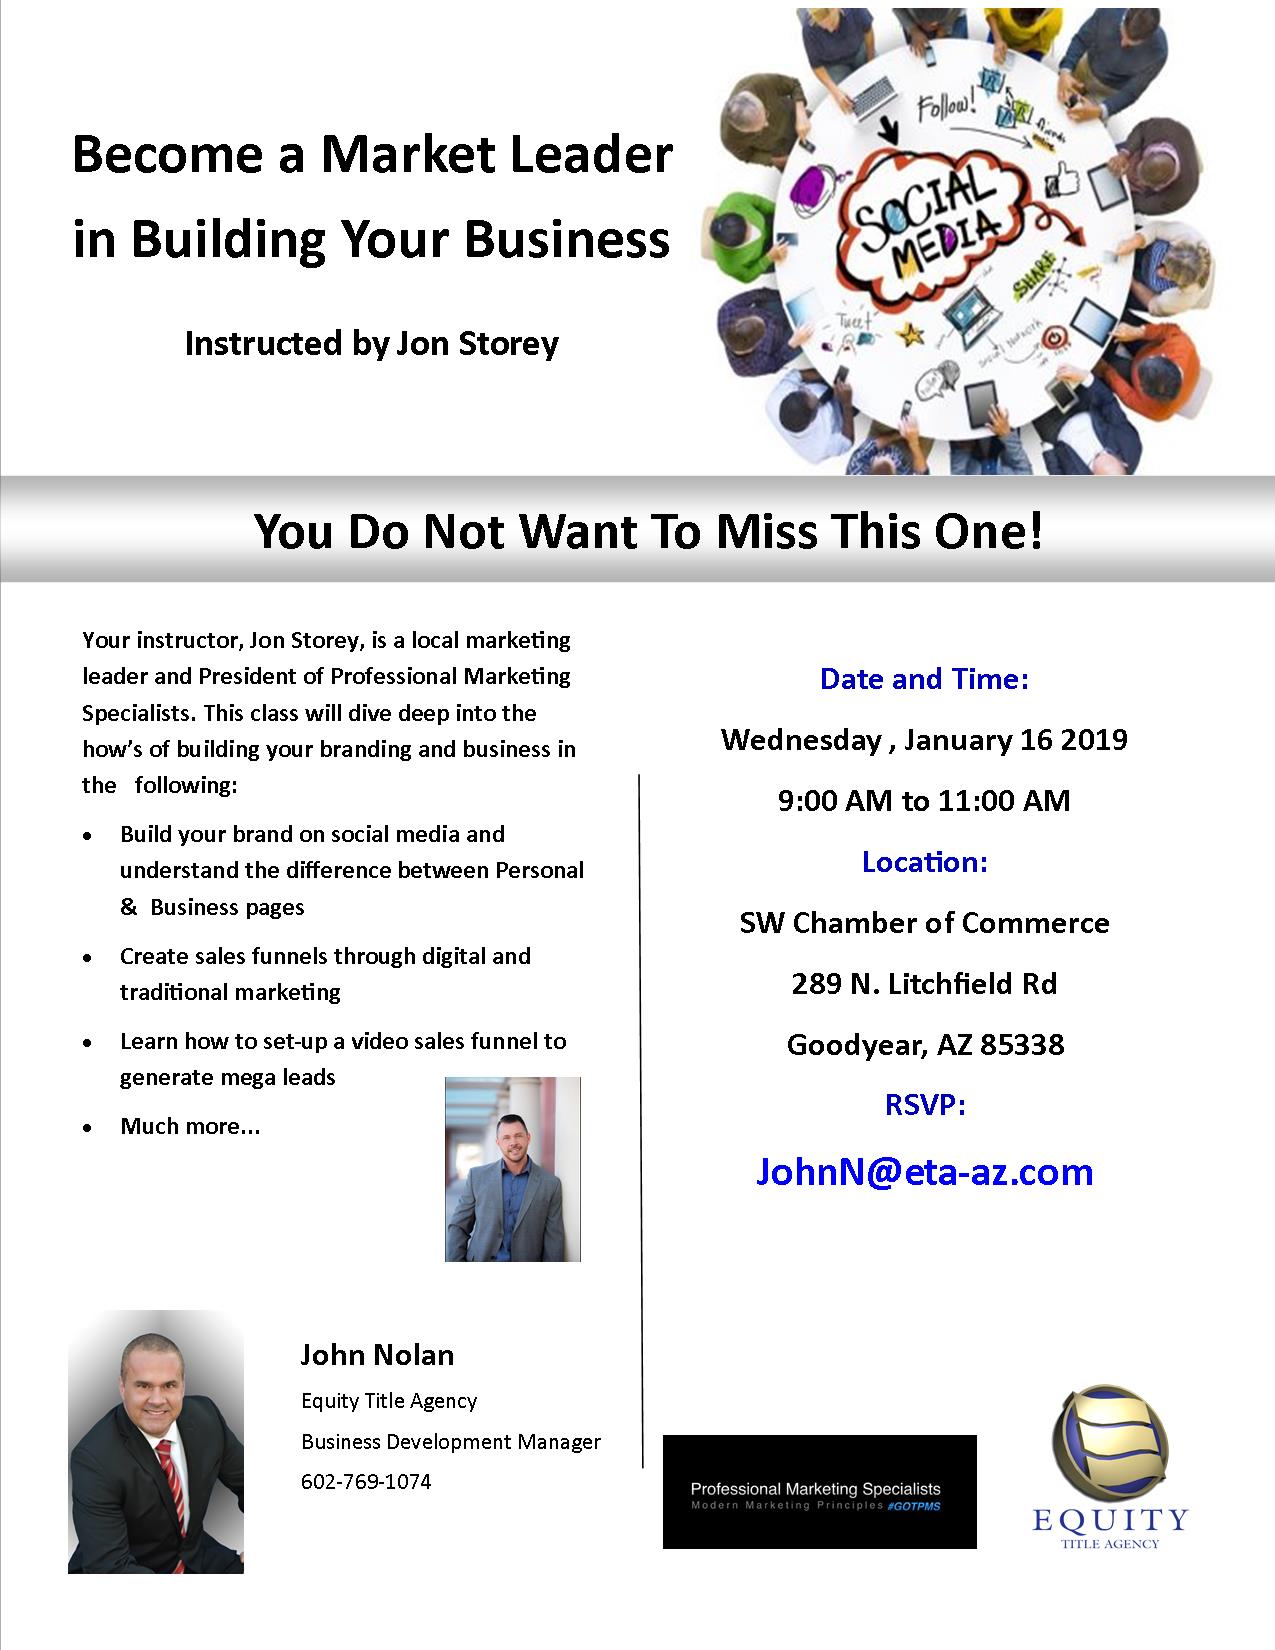 Become a Market Leader in Building your Business